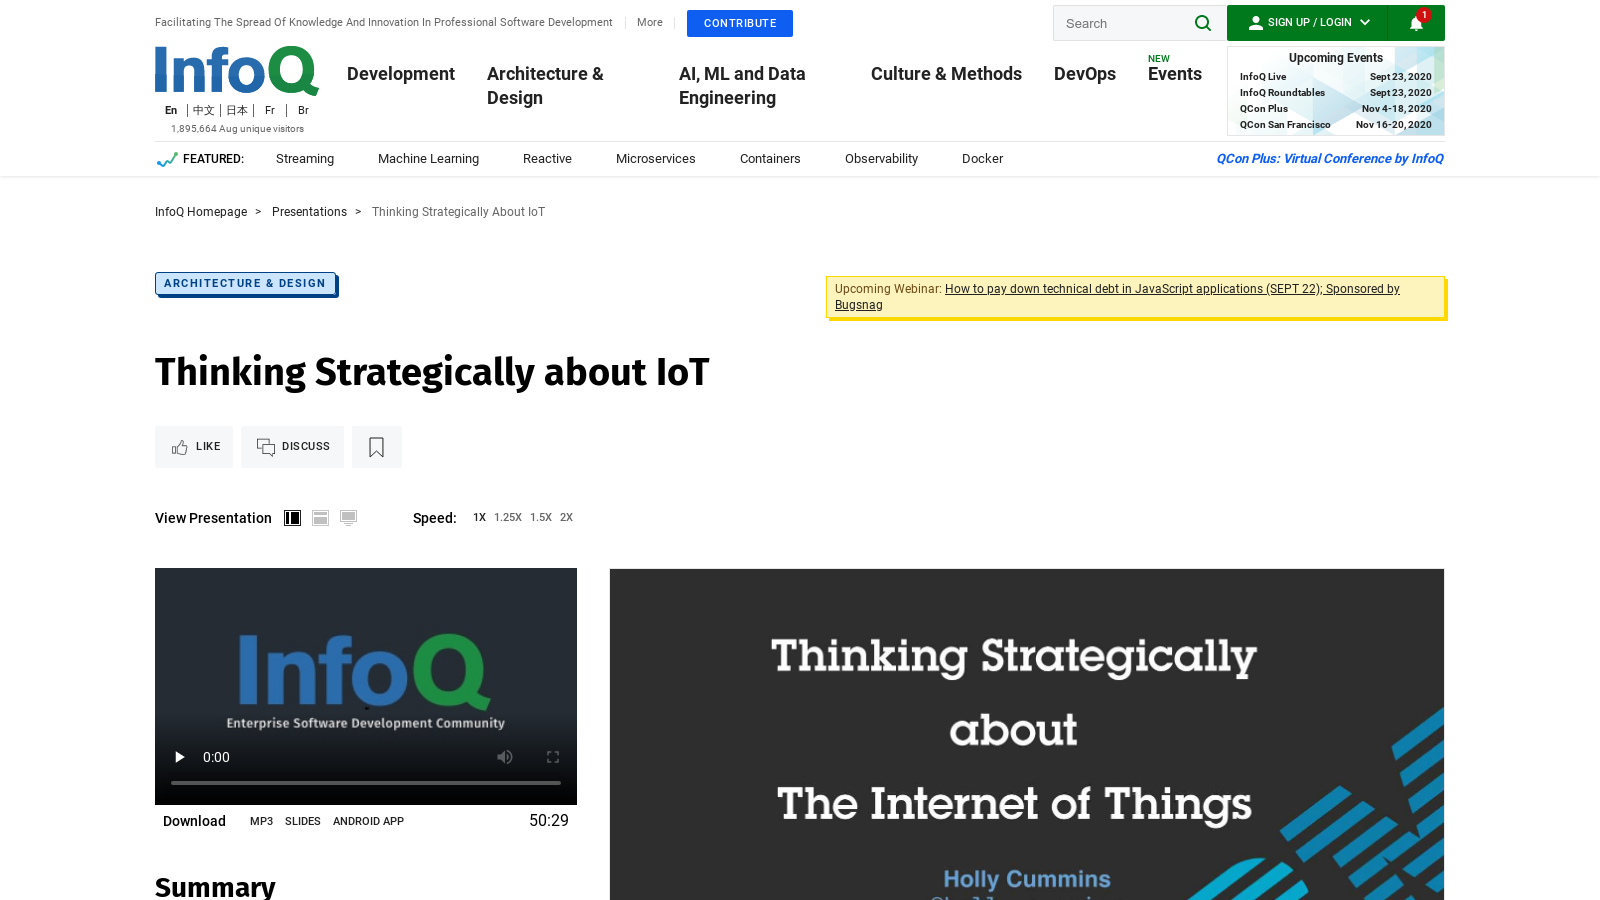 Thinking Strategically About IoT